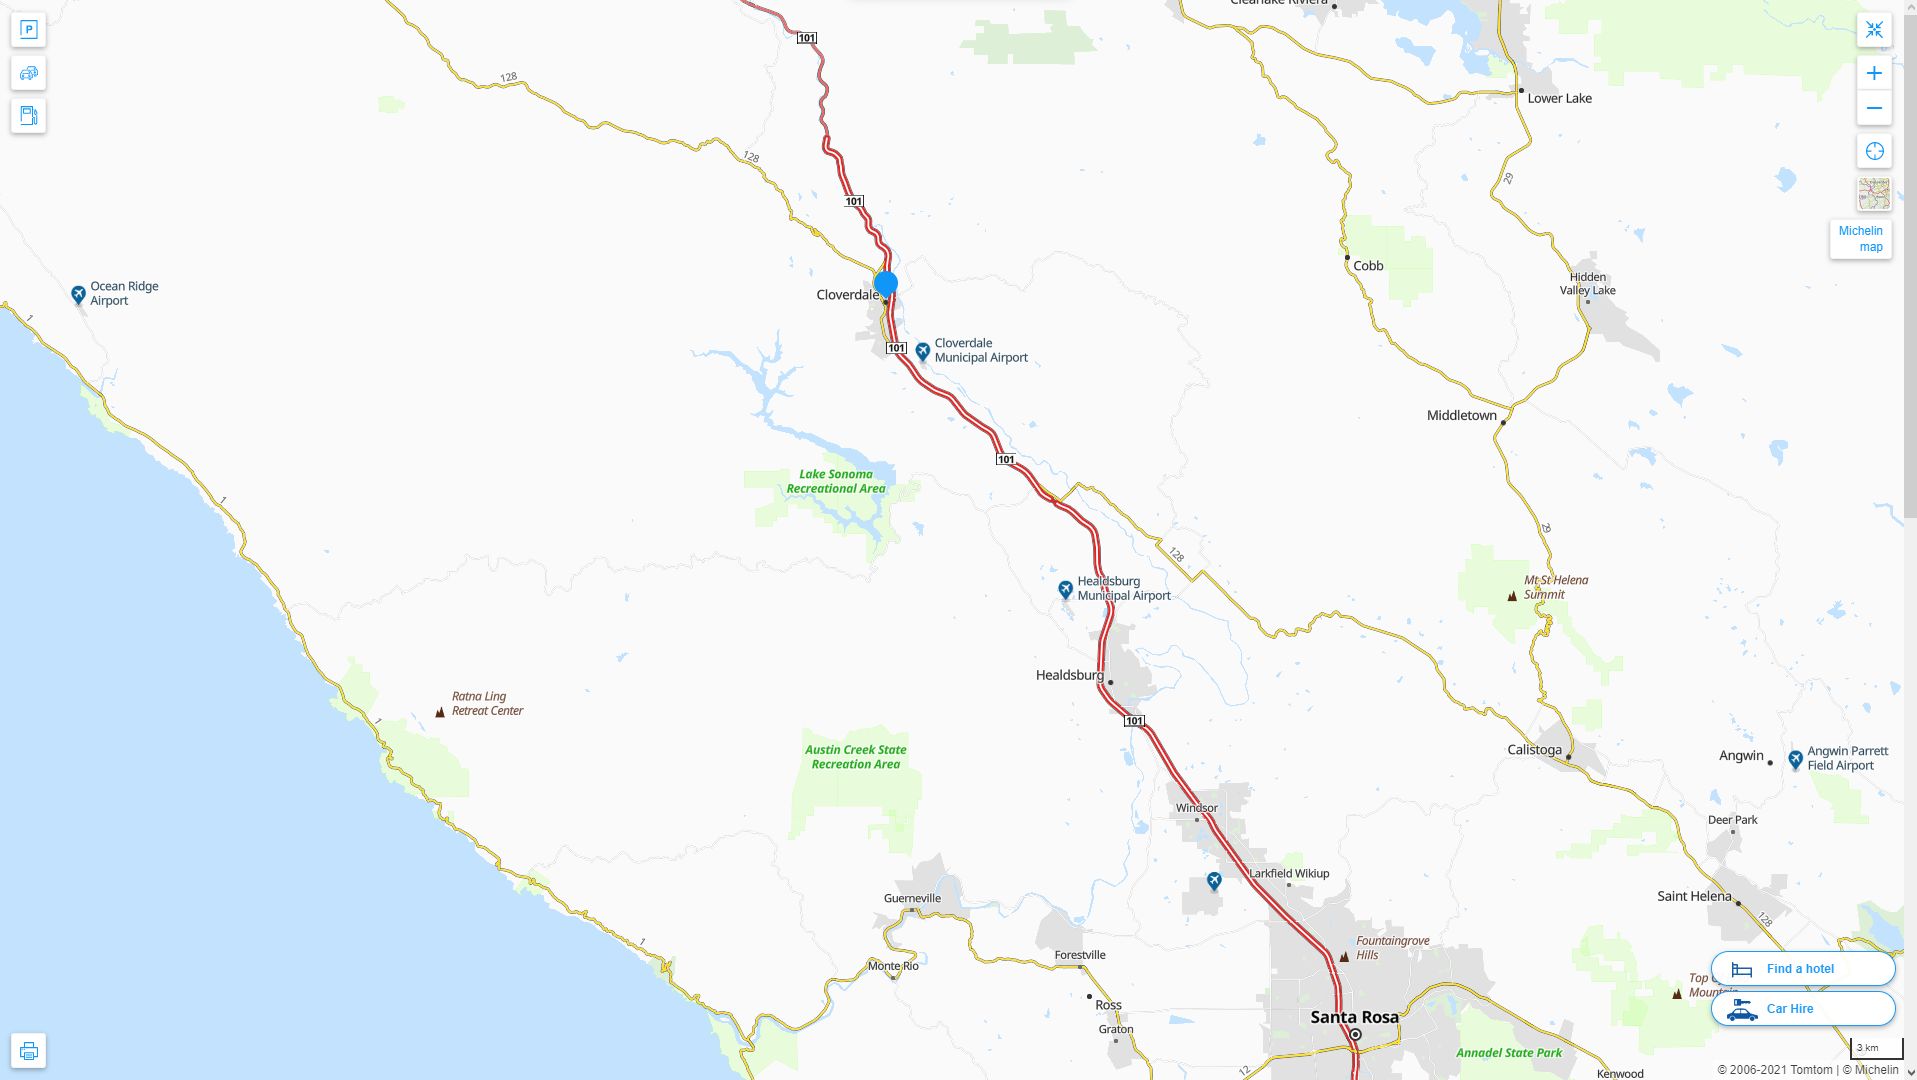 Cloverdale California Highway and Road Map